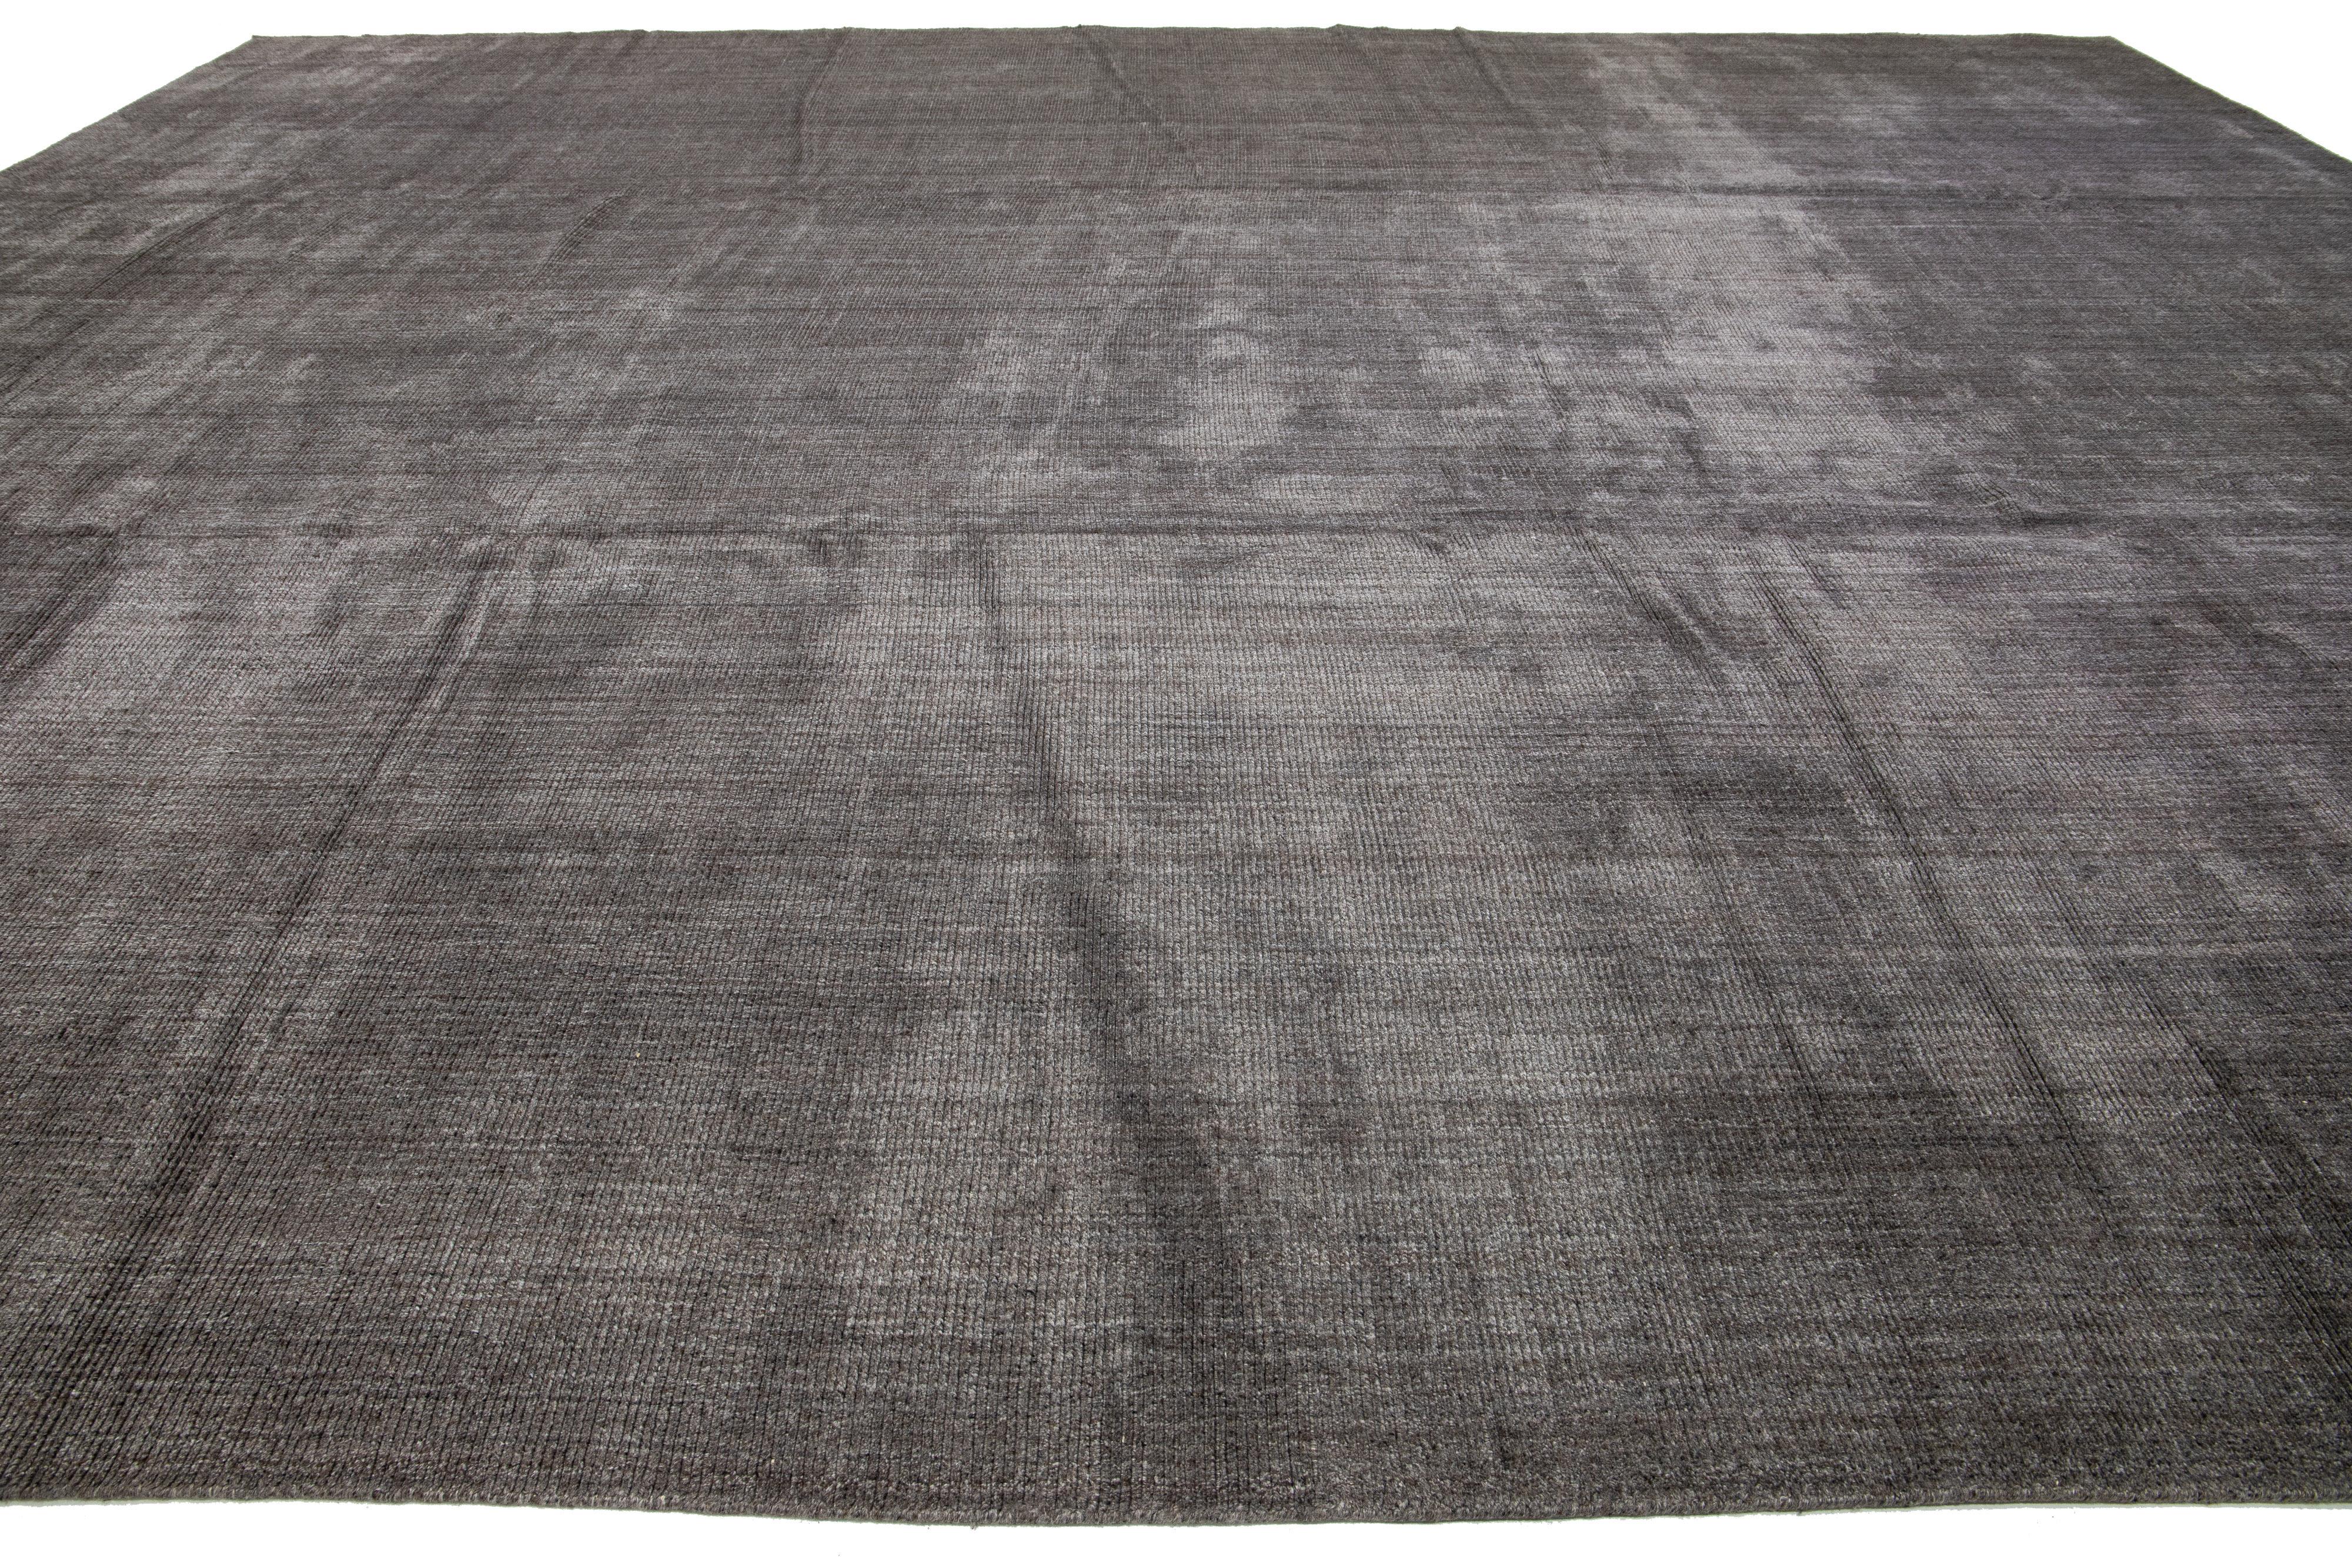 Oversized Handmade Gray Modern Indian Loop/Cut Wool Rug With Solid Design  For Sale 1